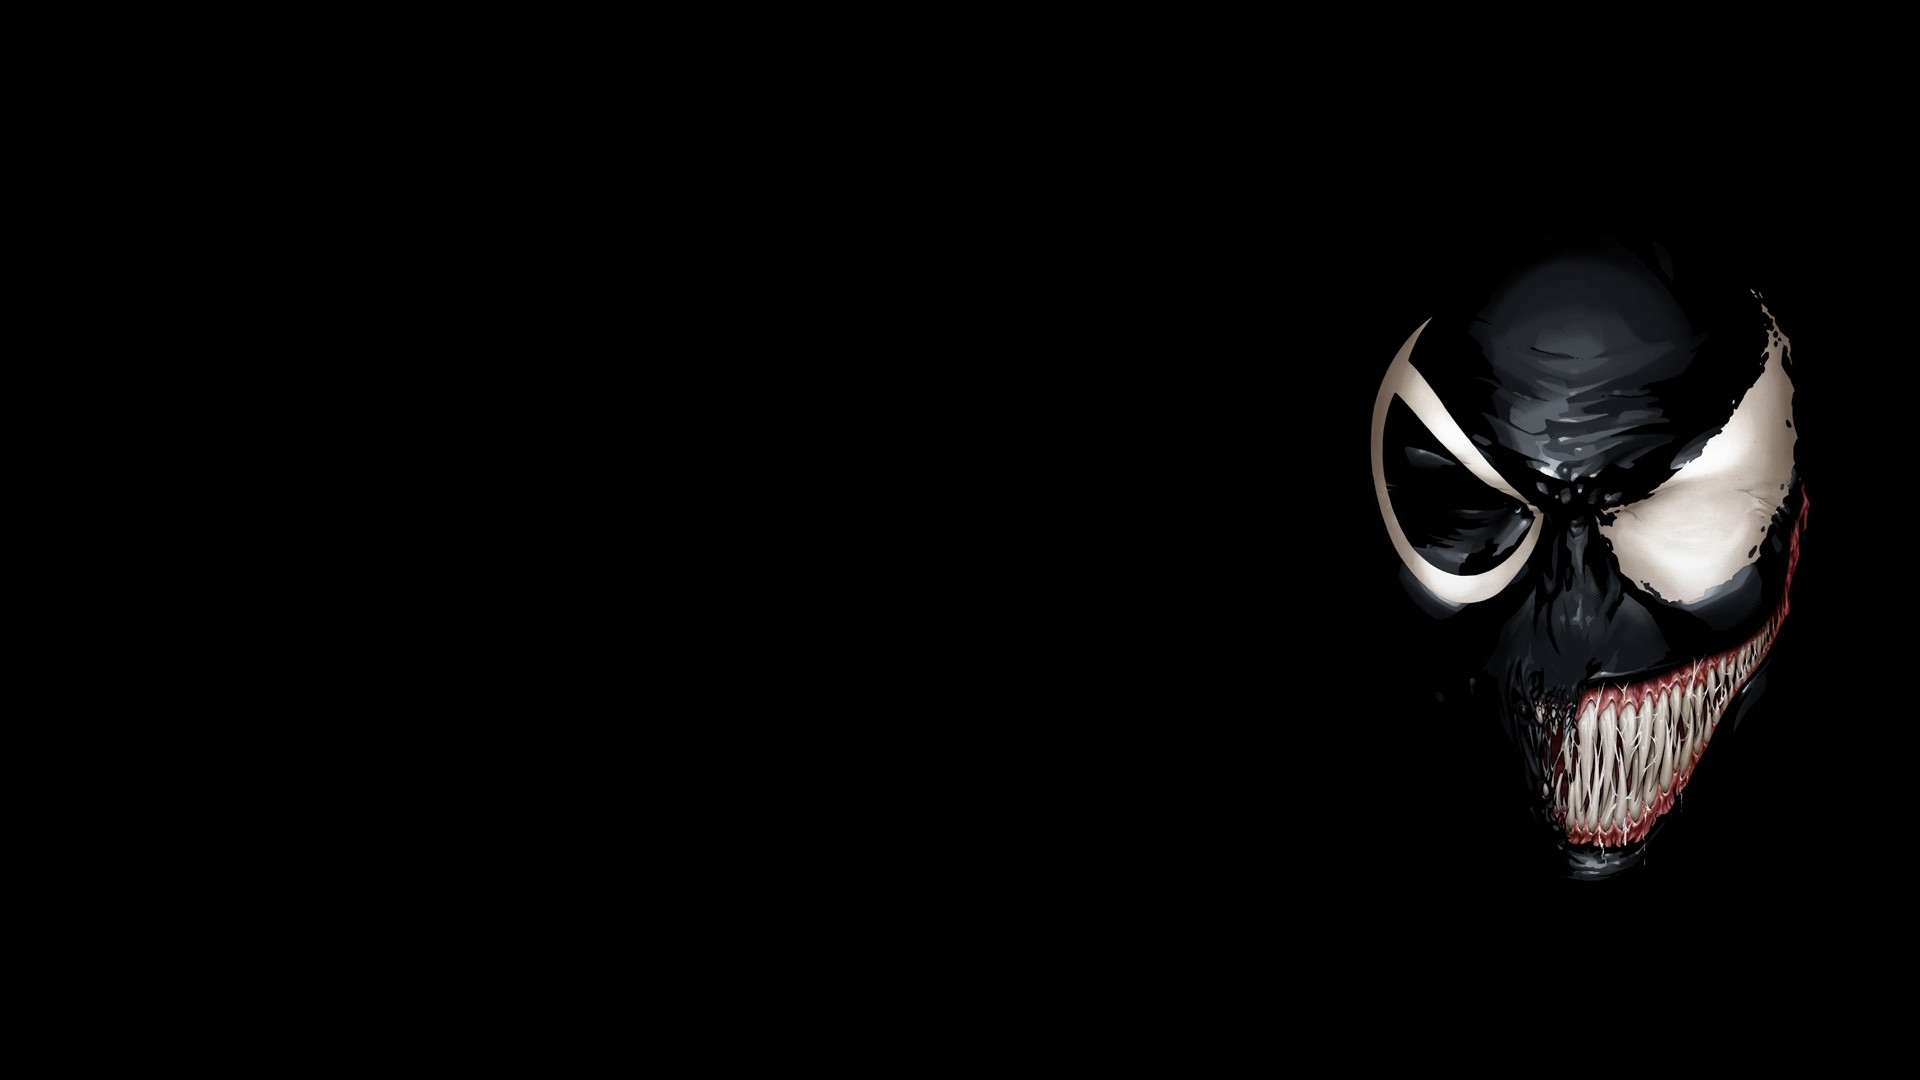 1920x1080 Search Results for “venom wallpaper hd – Adorable Wallpapers